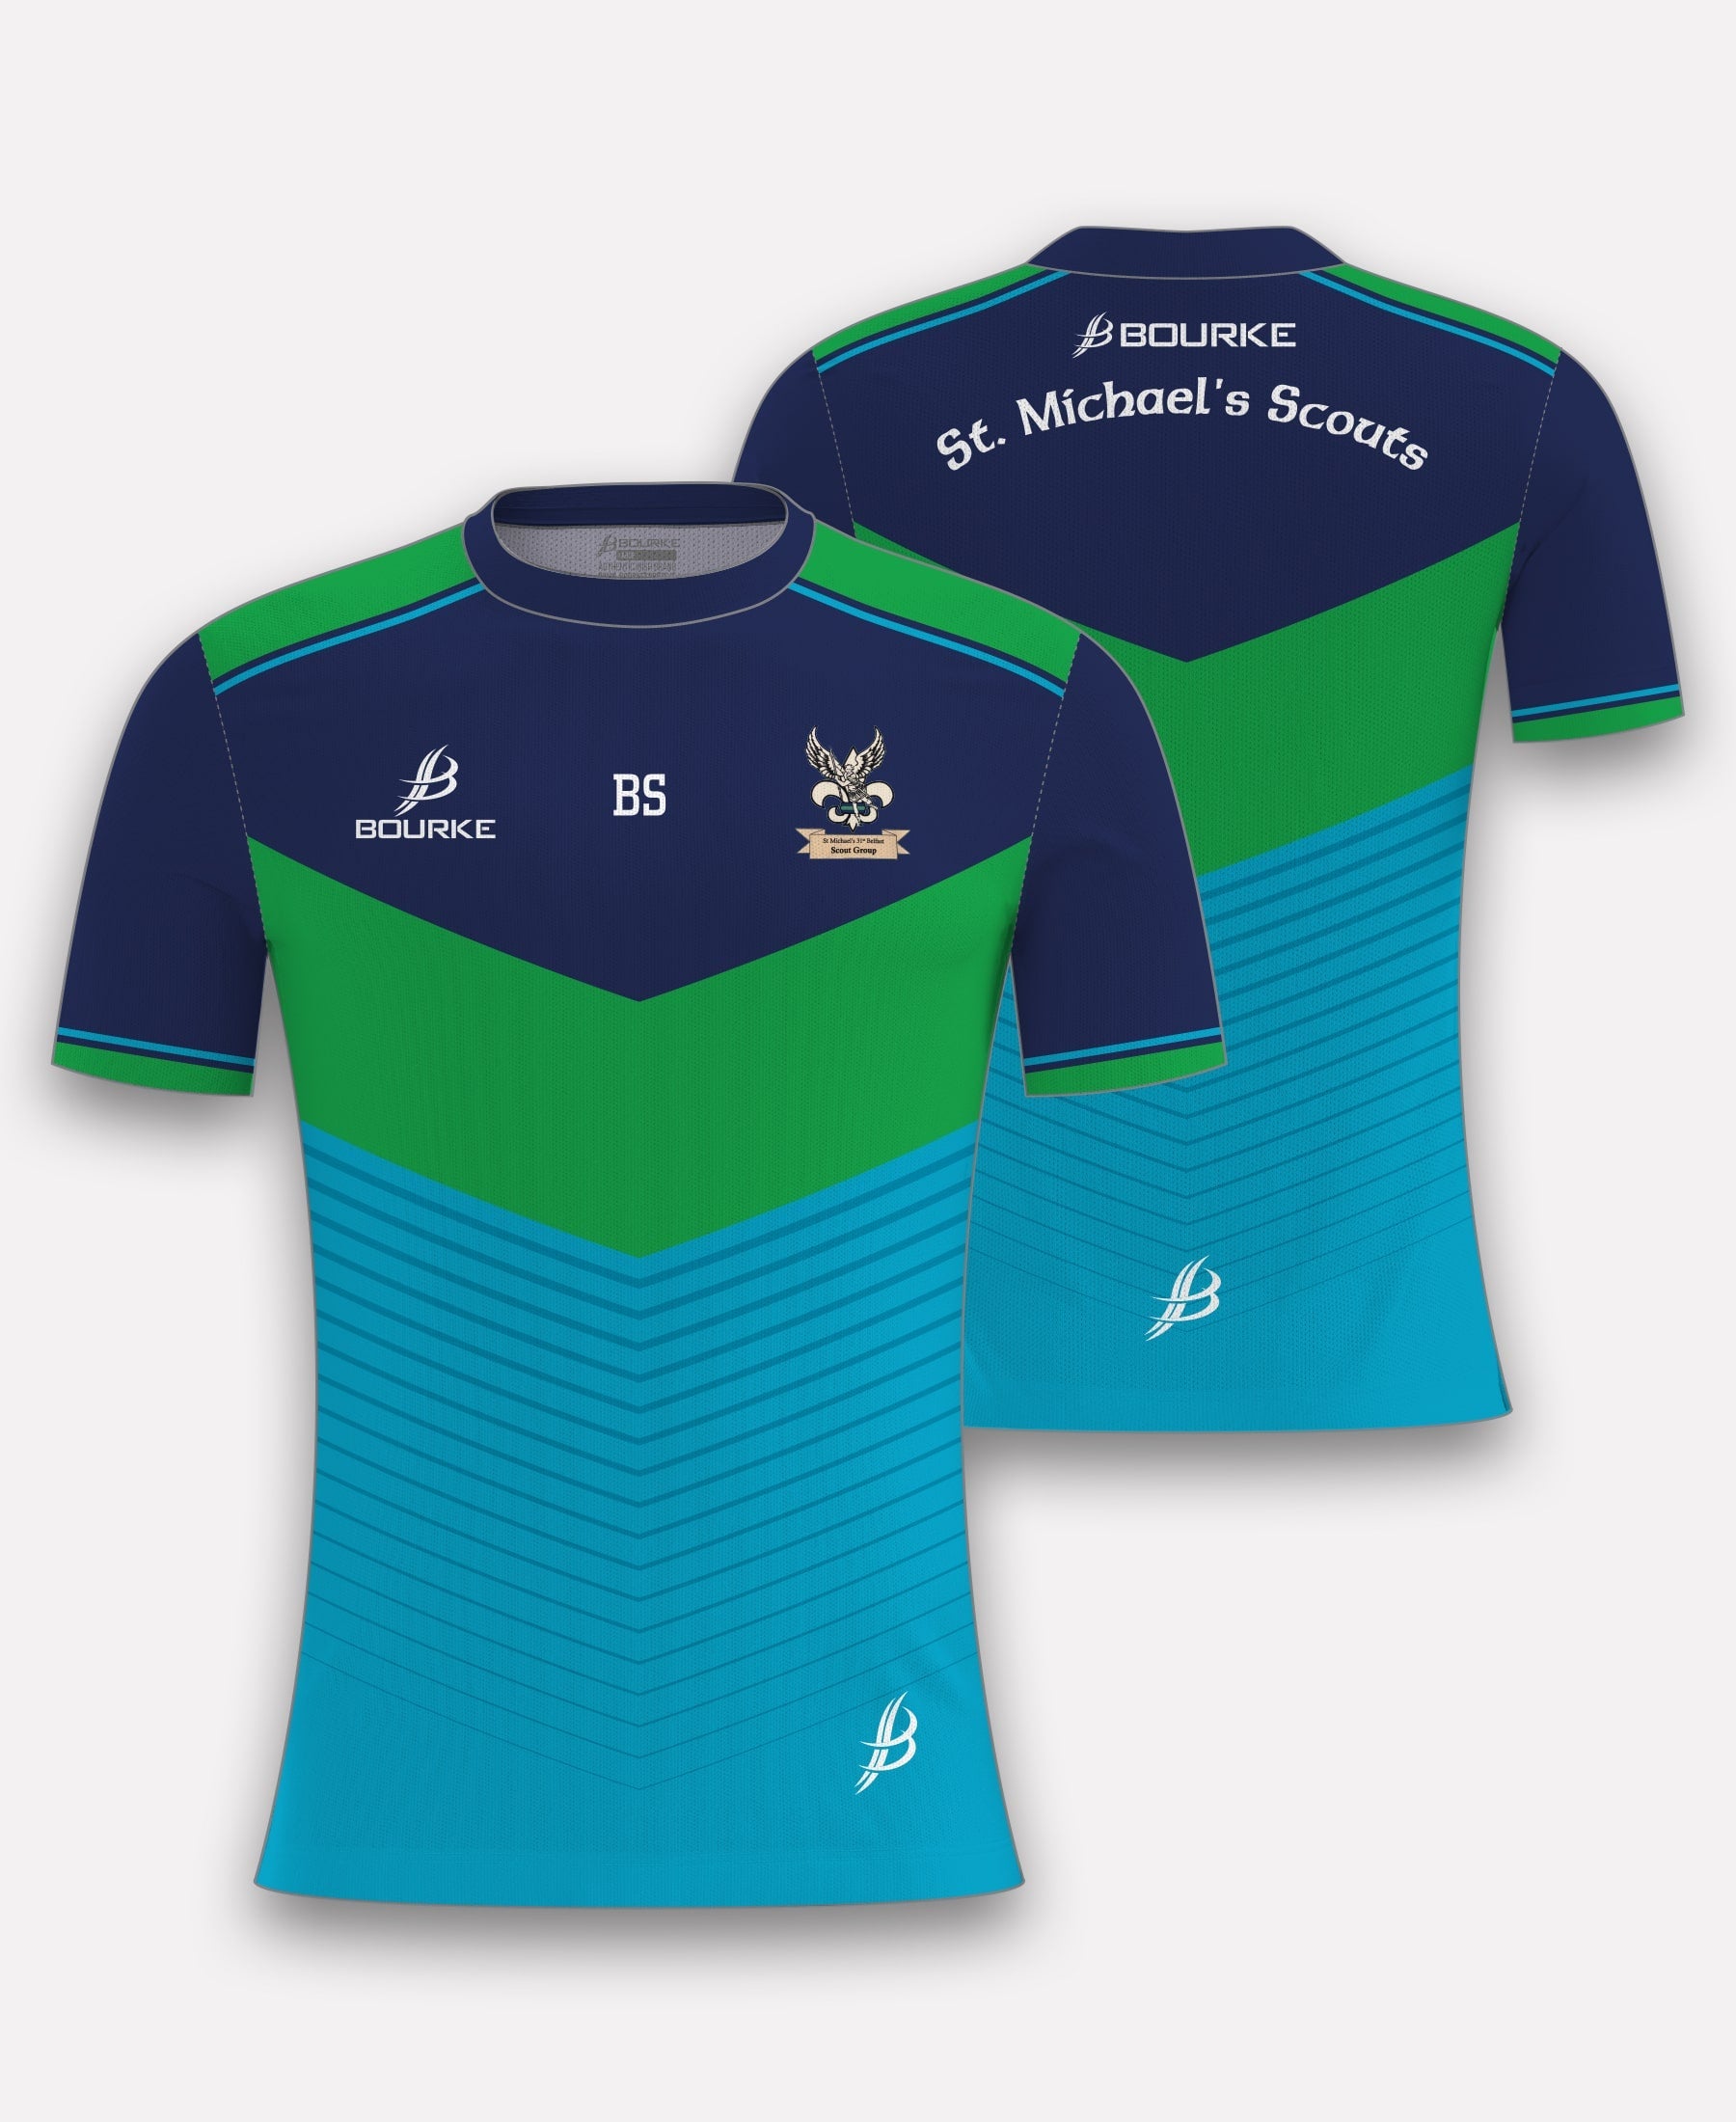 St Michael's Scouts Jersey